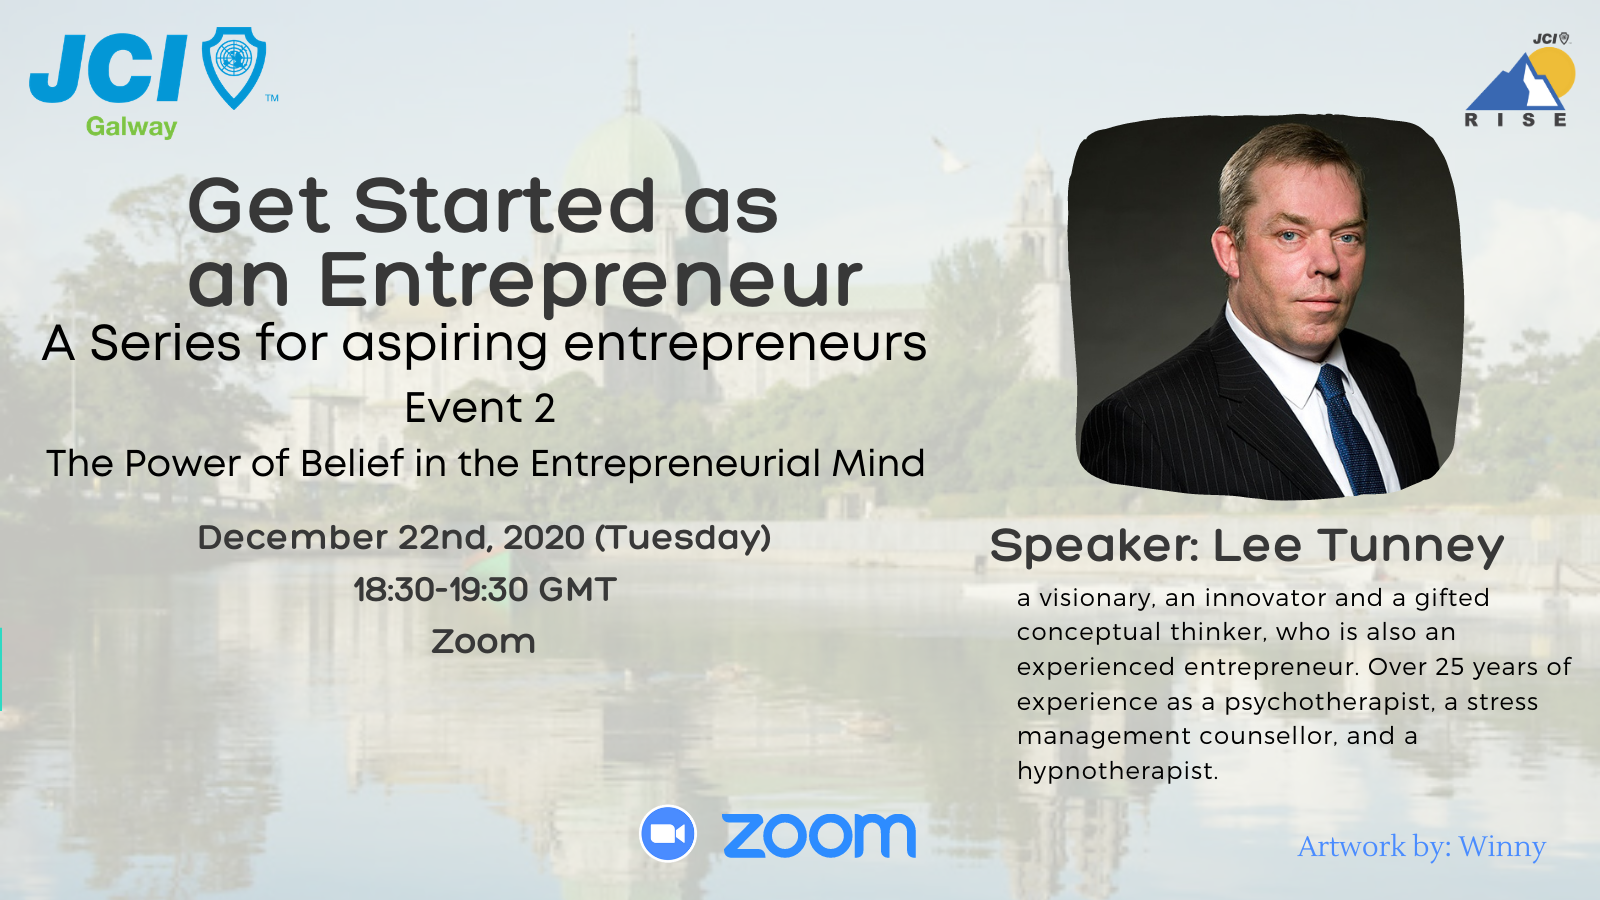 Get Started as an Entrepreneur Series - 2: The Power of Belief in the Entrepreneurial Mind